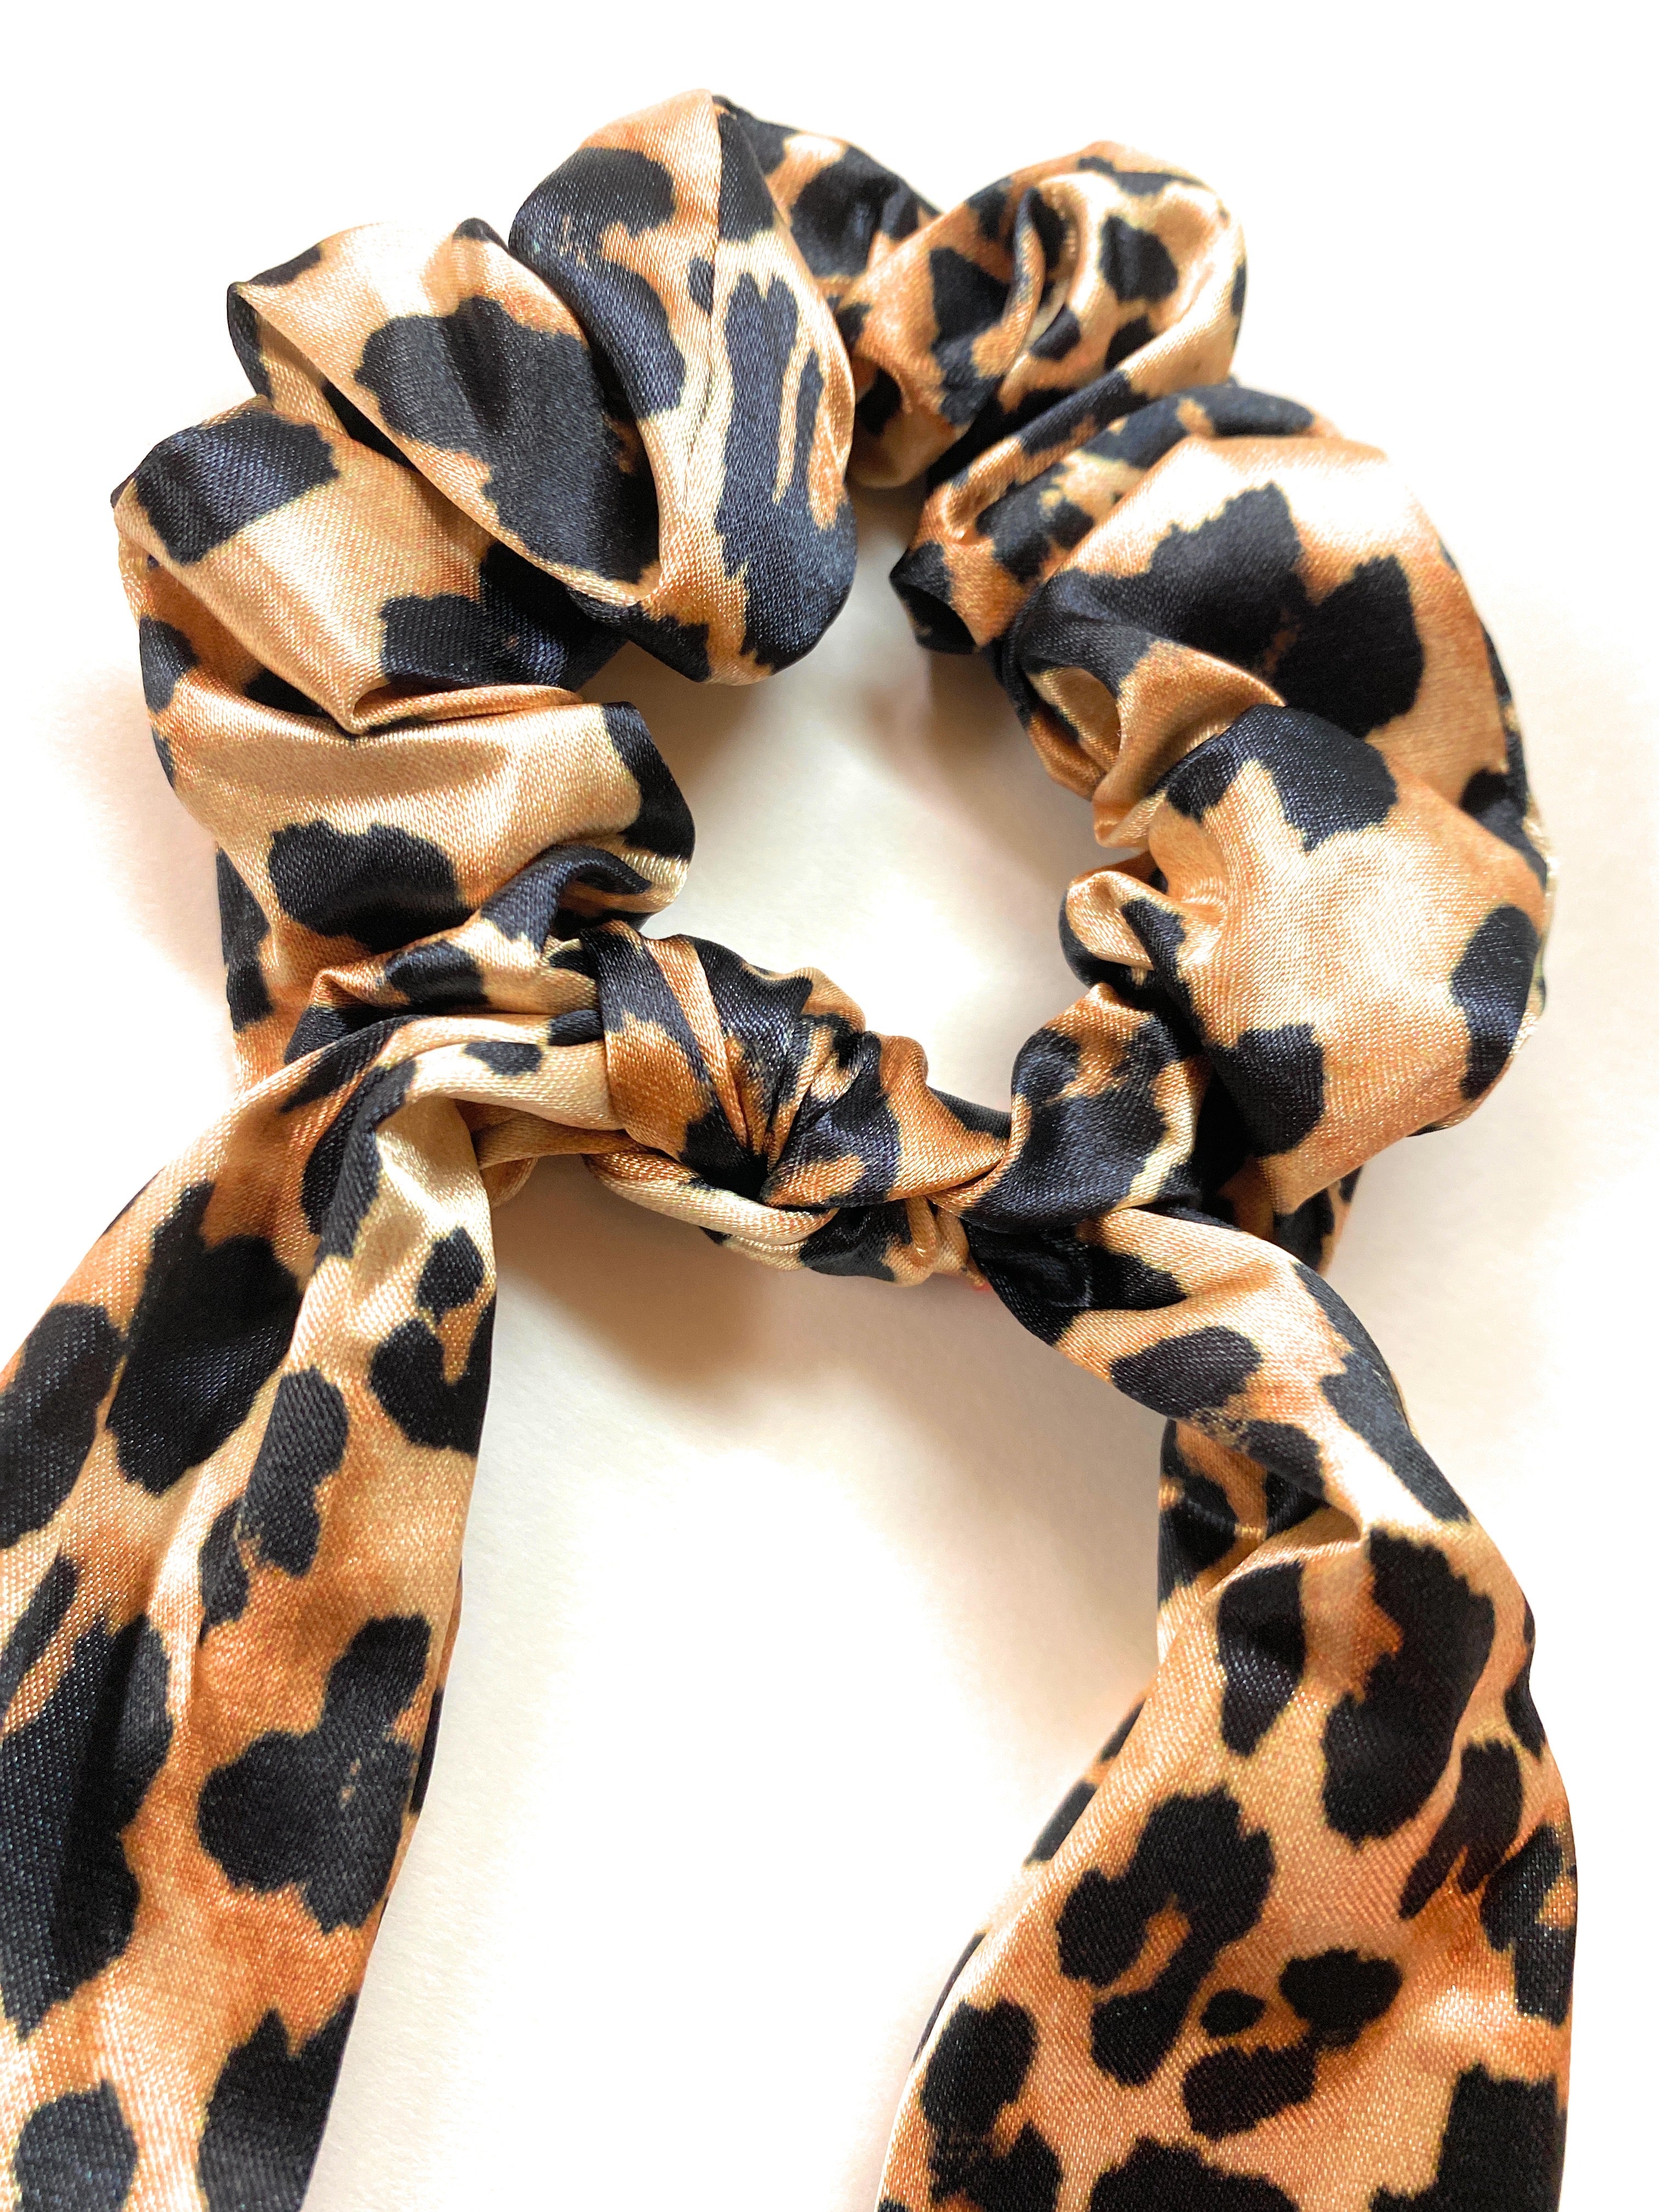 Scunchiwinter Leopard Scrunchie - Warm Polyester Hair Band For Women